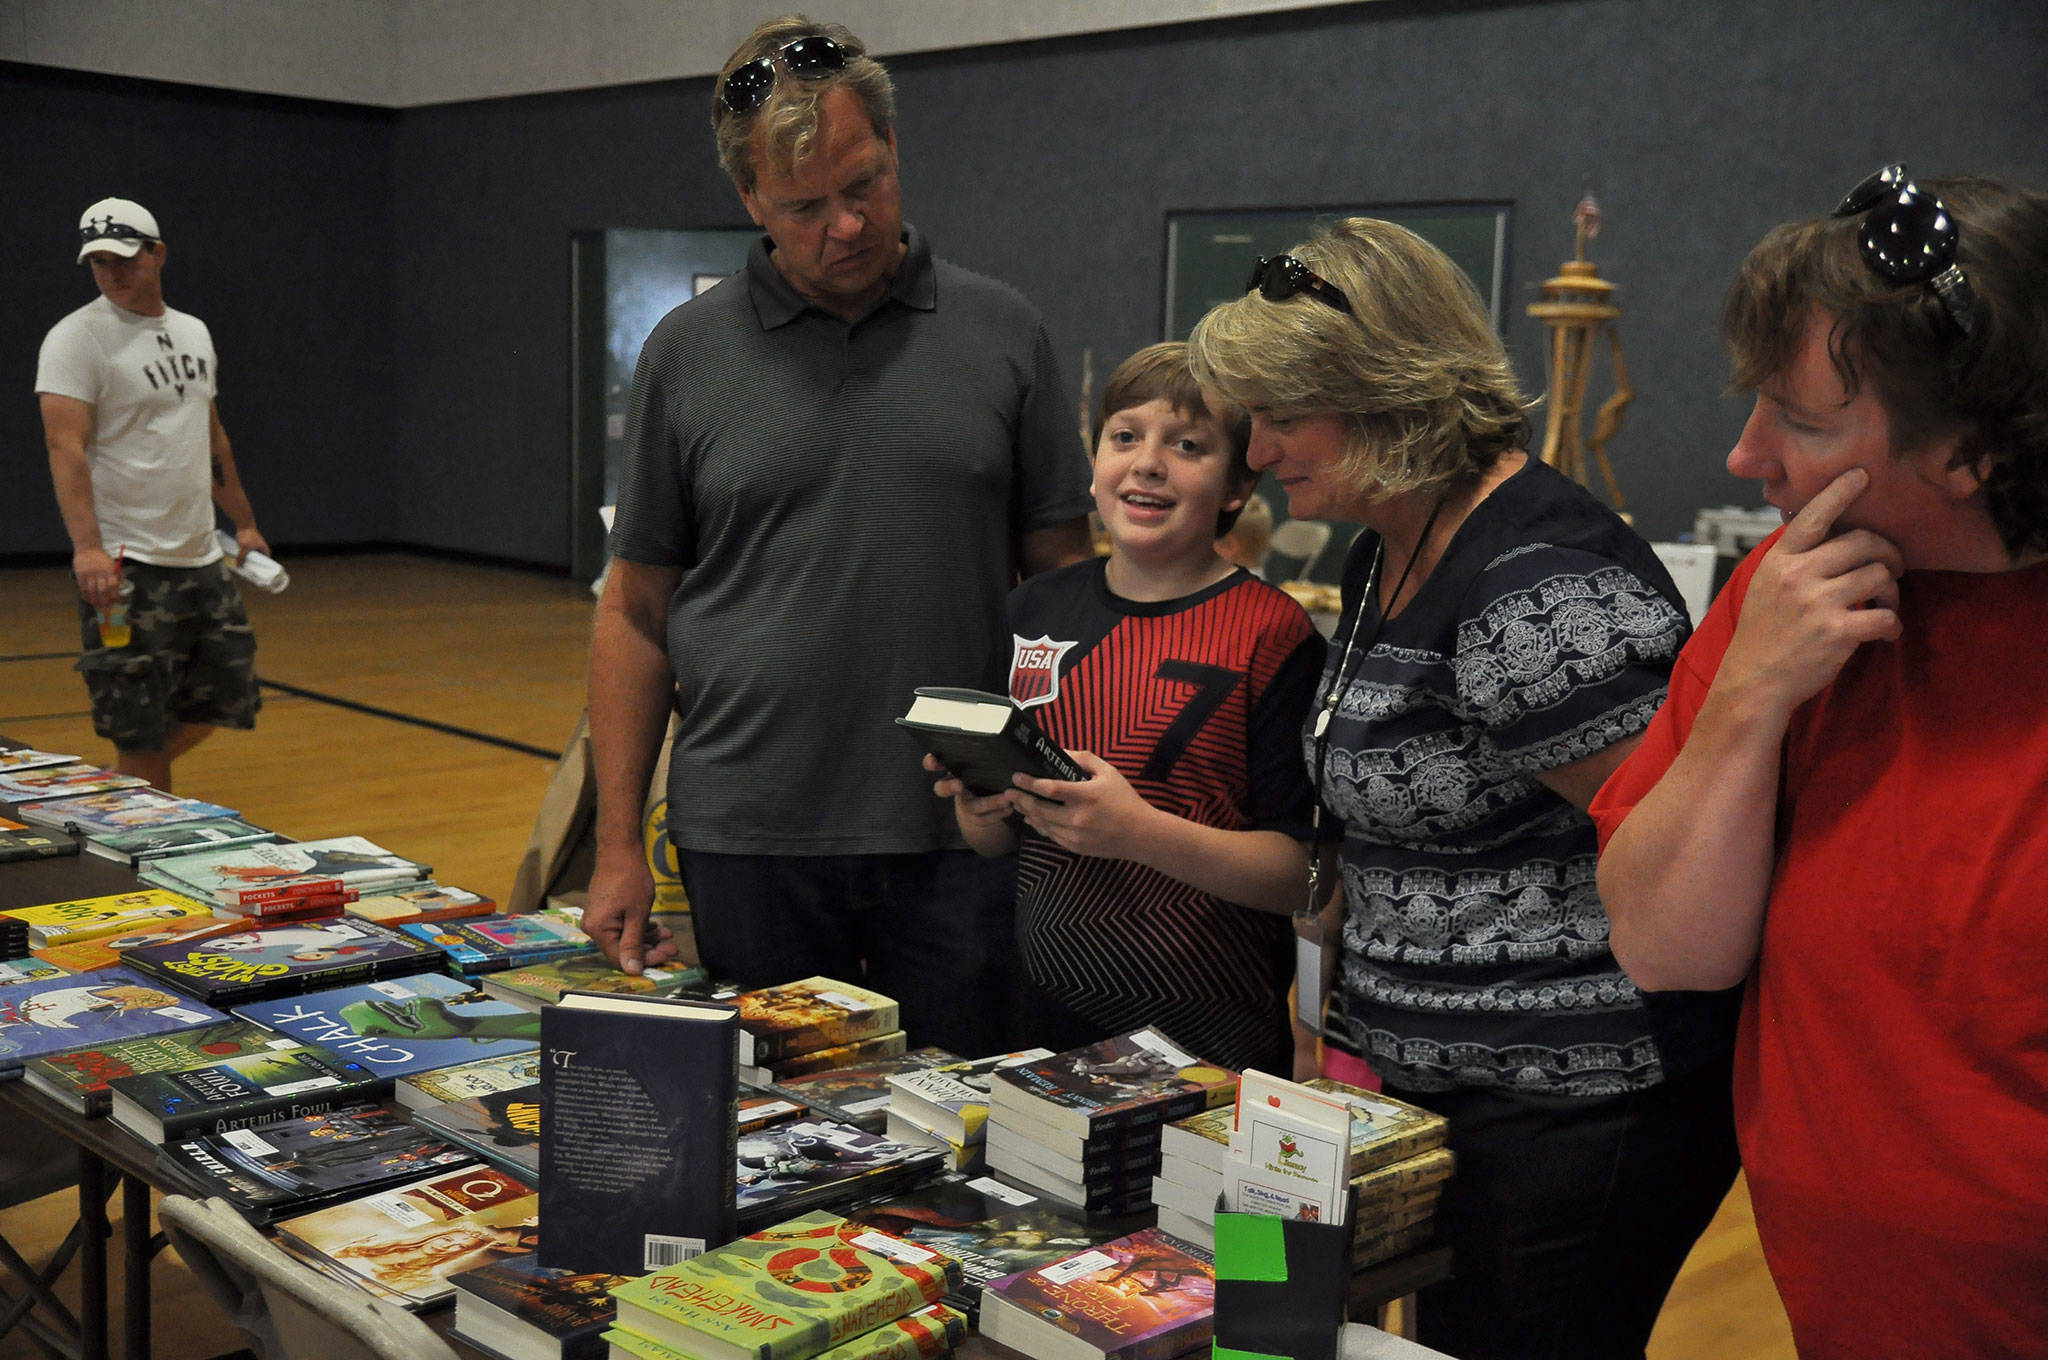 The Bowden family looks at Jonathan’s new book he received from Sequim’s Back to School Fair provided by the Clallam County Literacy Council. Volunteers setup at close to a dozen events like this each year to promote reading. Sequim Gazette file photo by Michael Dashiell